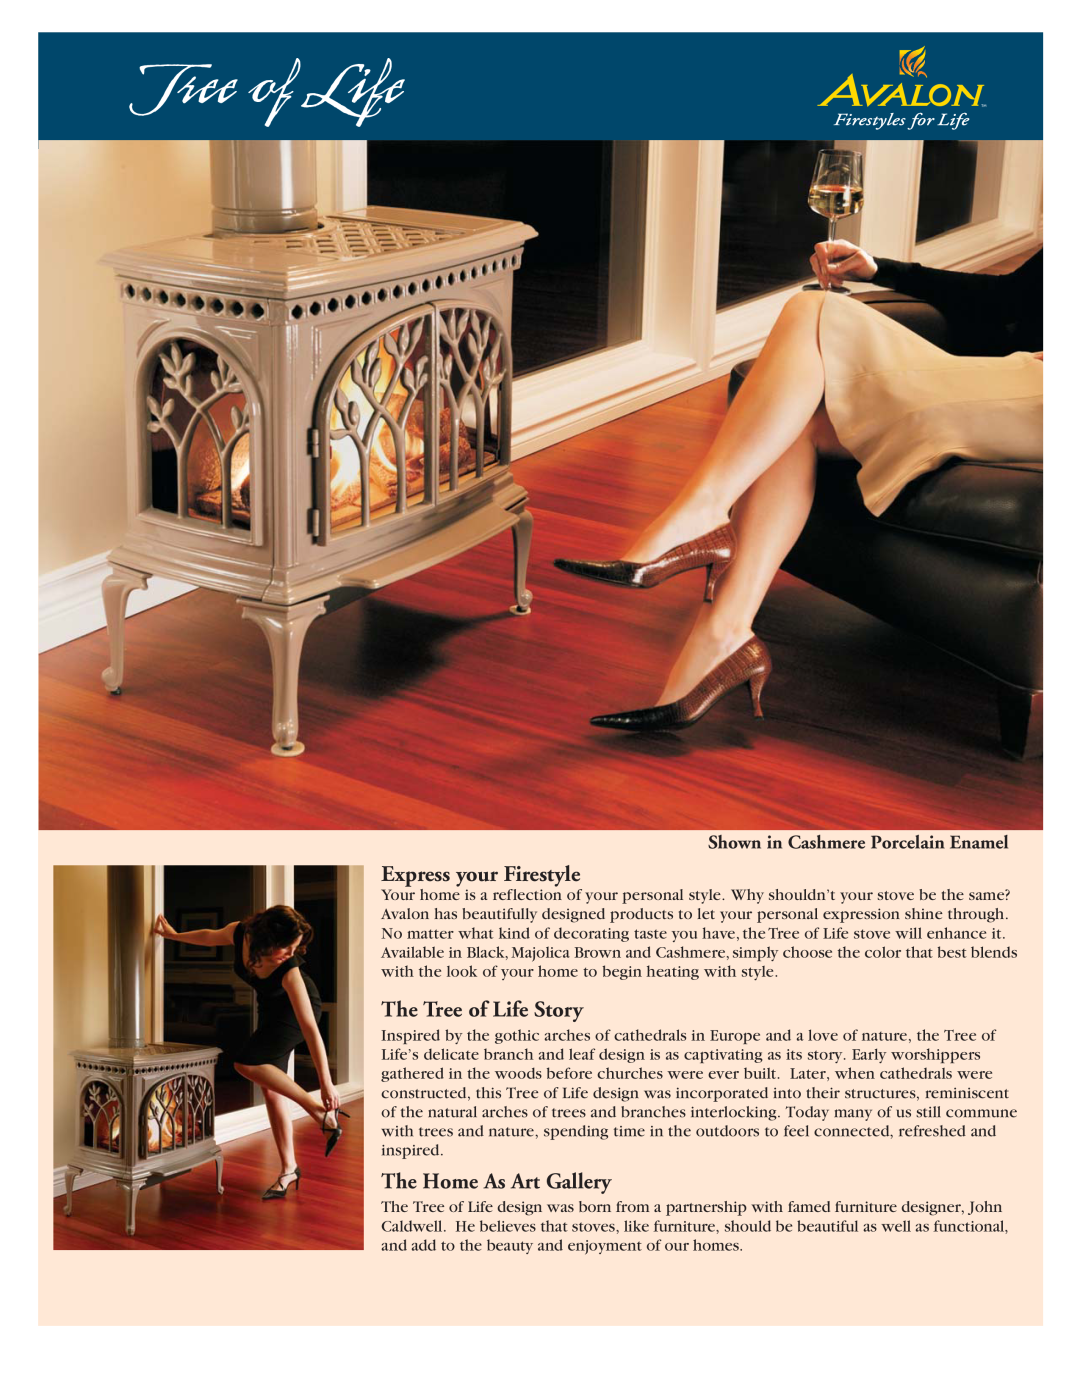 Avalon Stoves manual Express your Firestyle, The Tree of Life Story, The Home As Art Gallery 